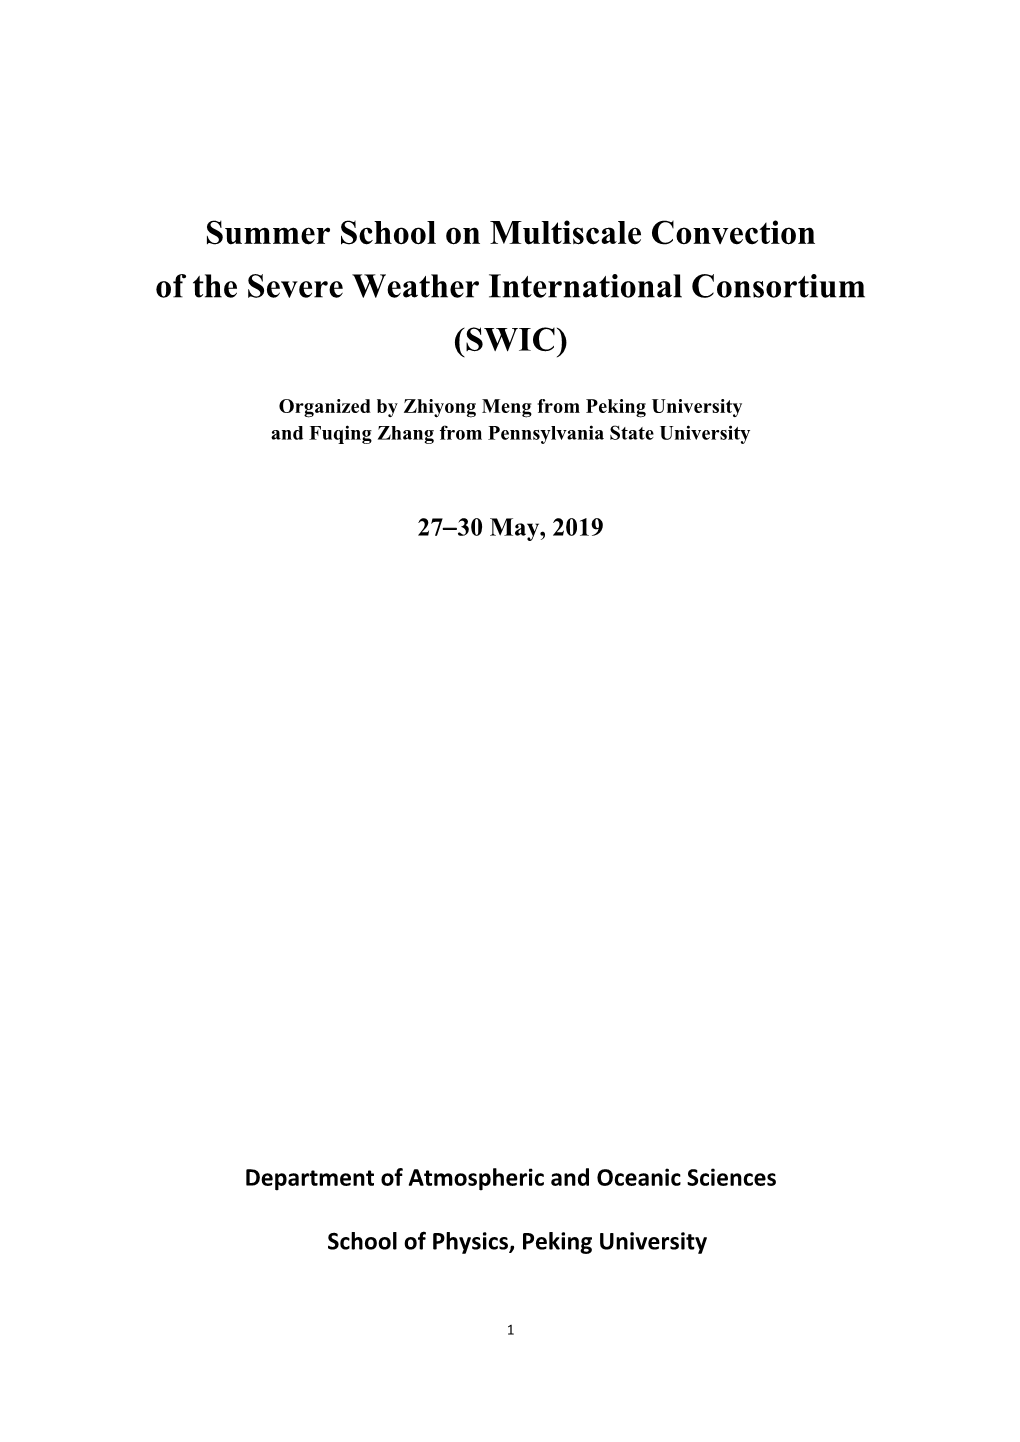 Summer School on Multiscale Convection of the Severe Weather International Consortium (SWIC)